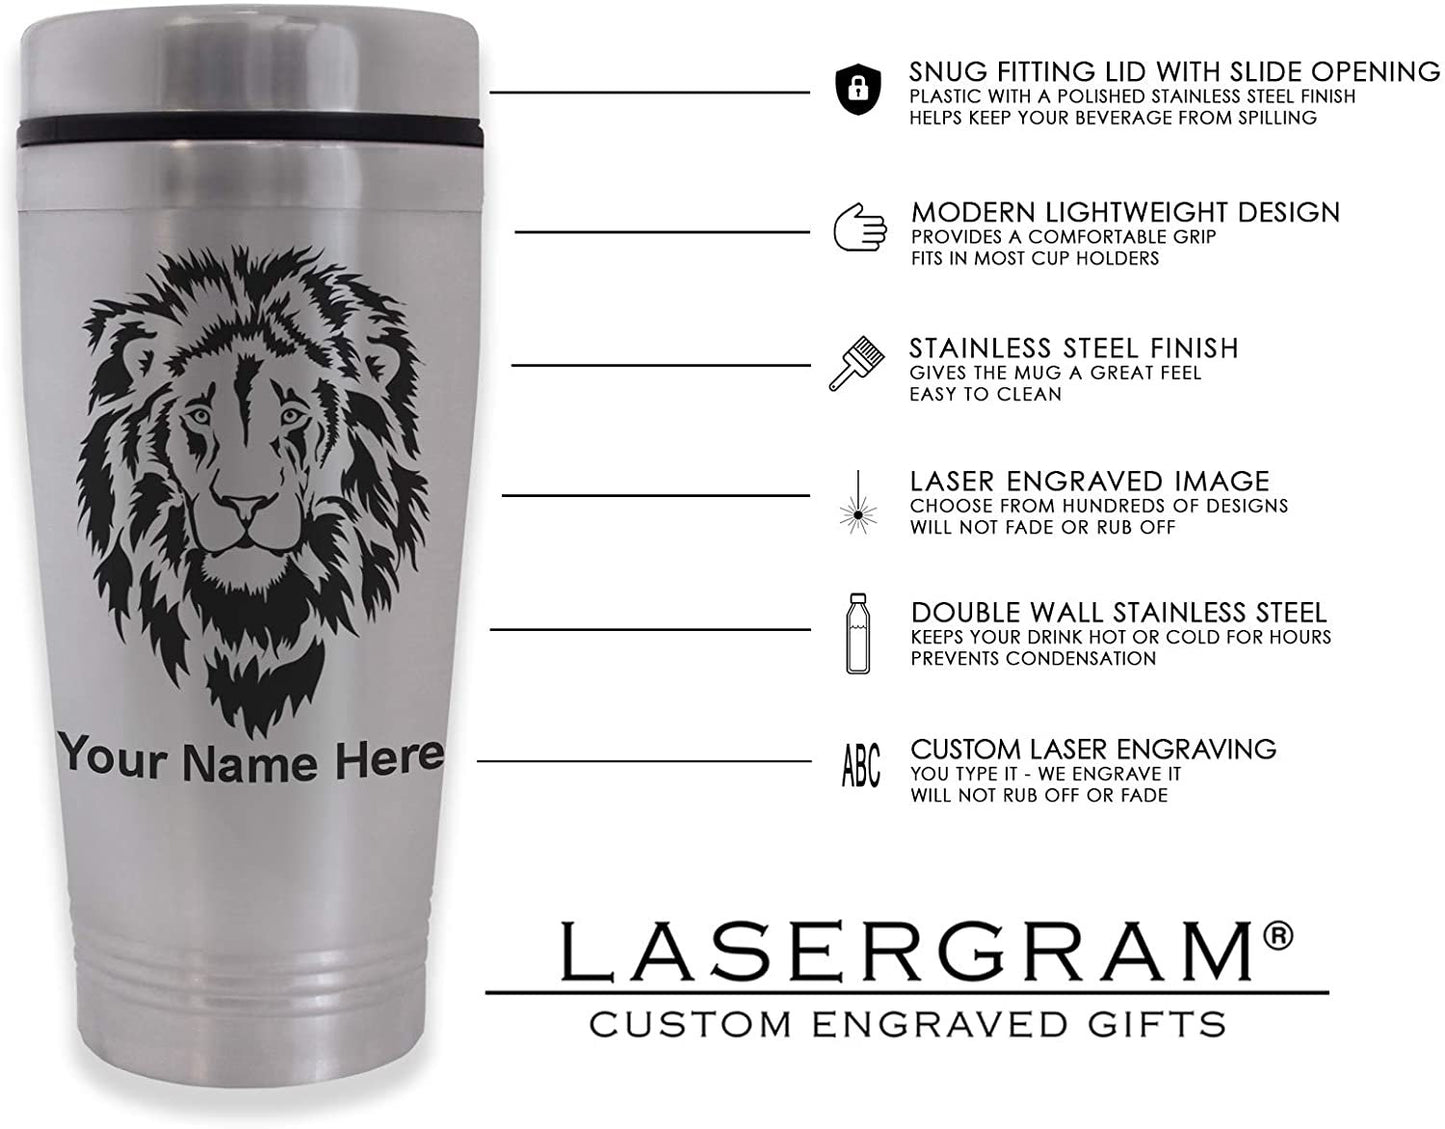 Commuter Travel Mug, Seahorse, Personalized Engraving Included